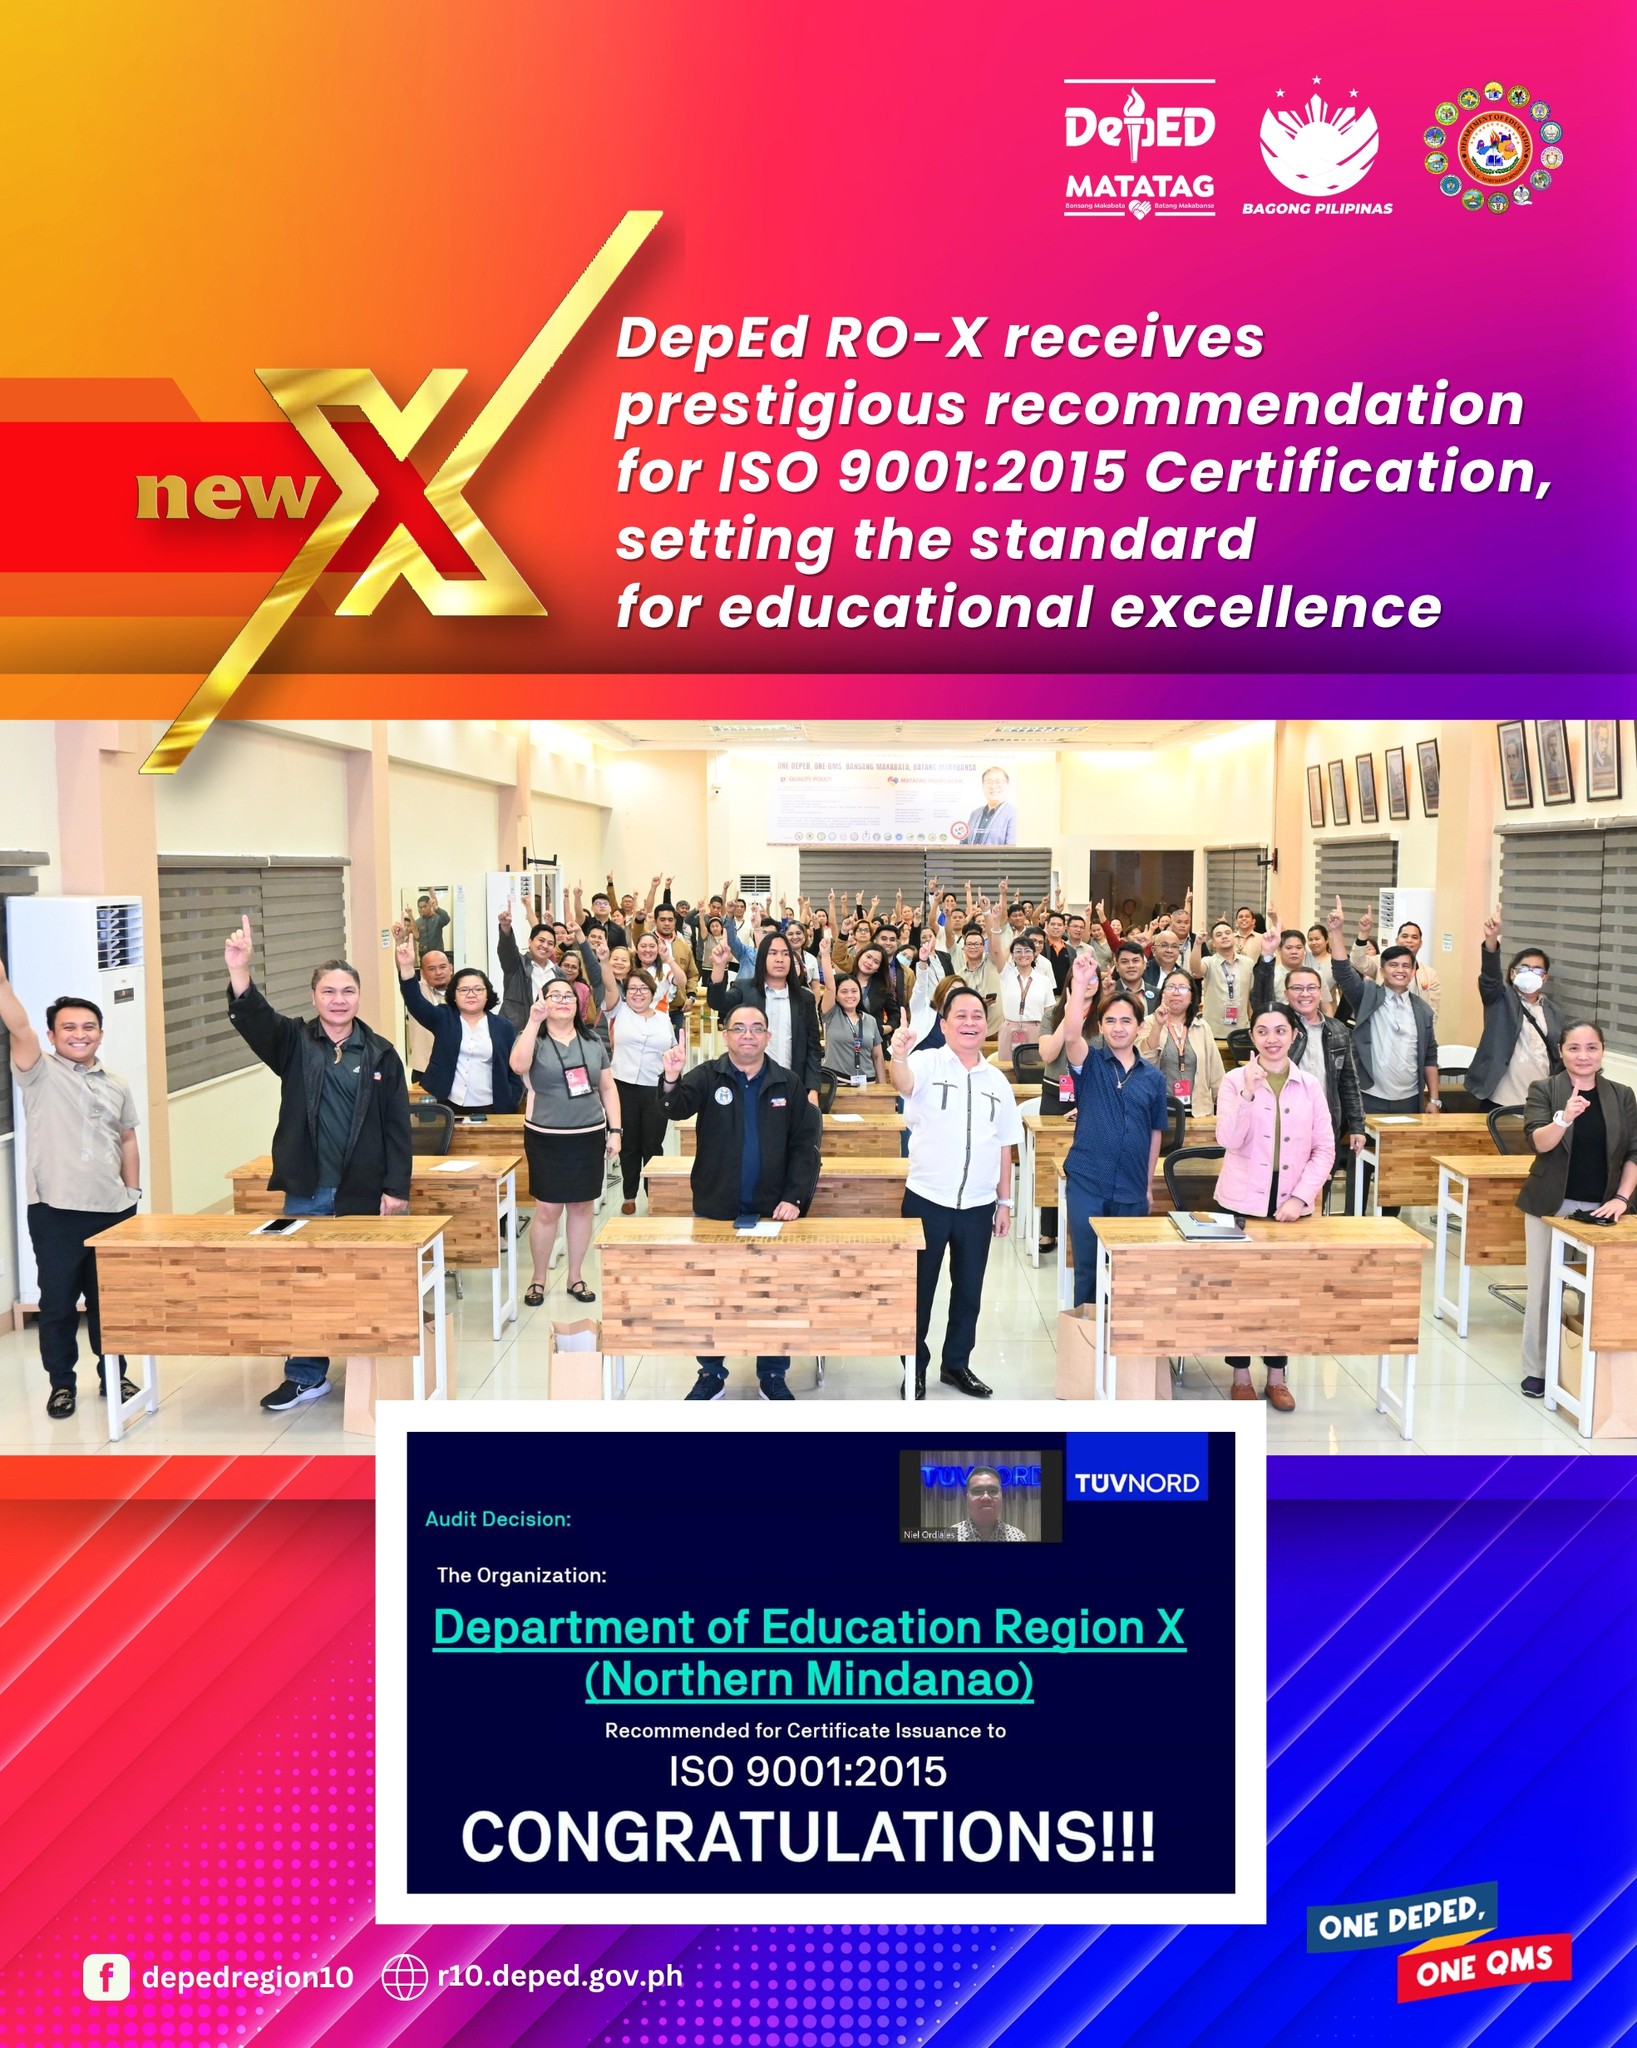 DepEd RO-X receives prestigious recommendation for ISO 9001:2015 Certification, setting the standard for educational excellence